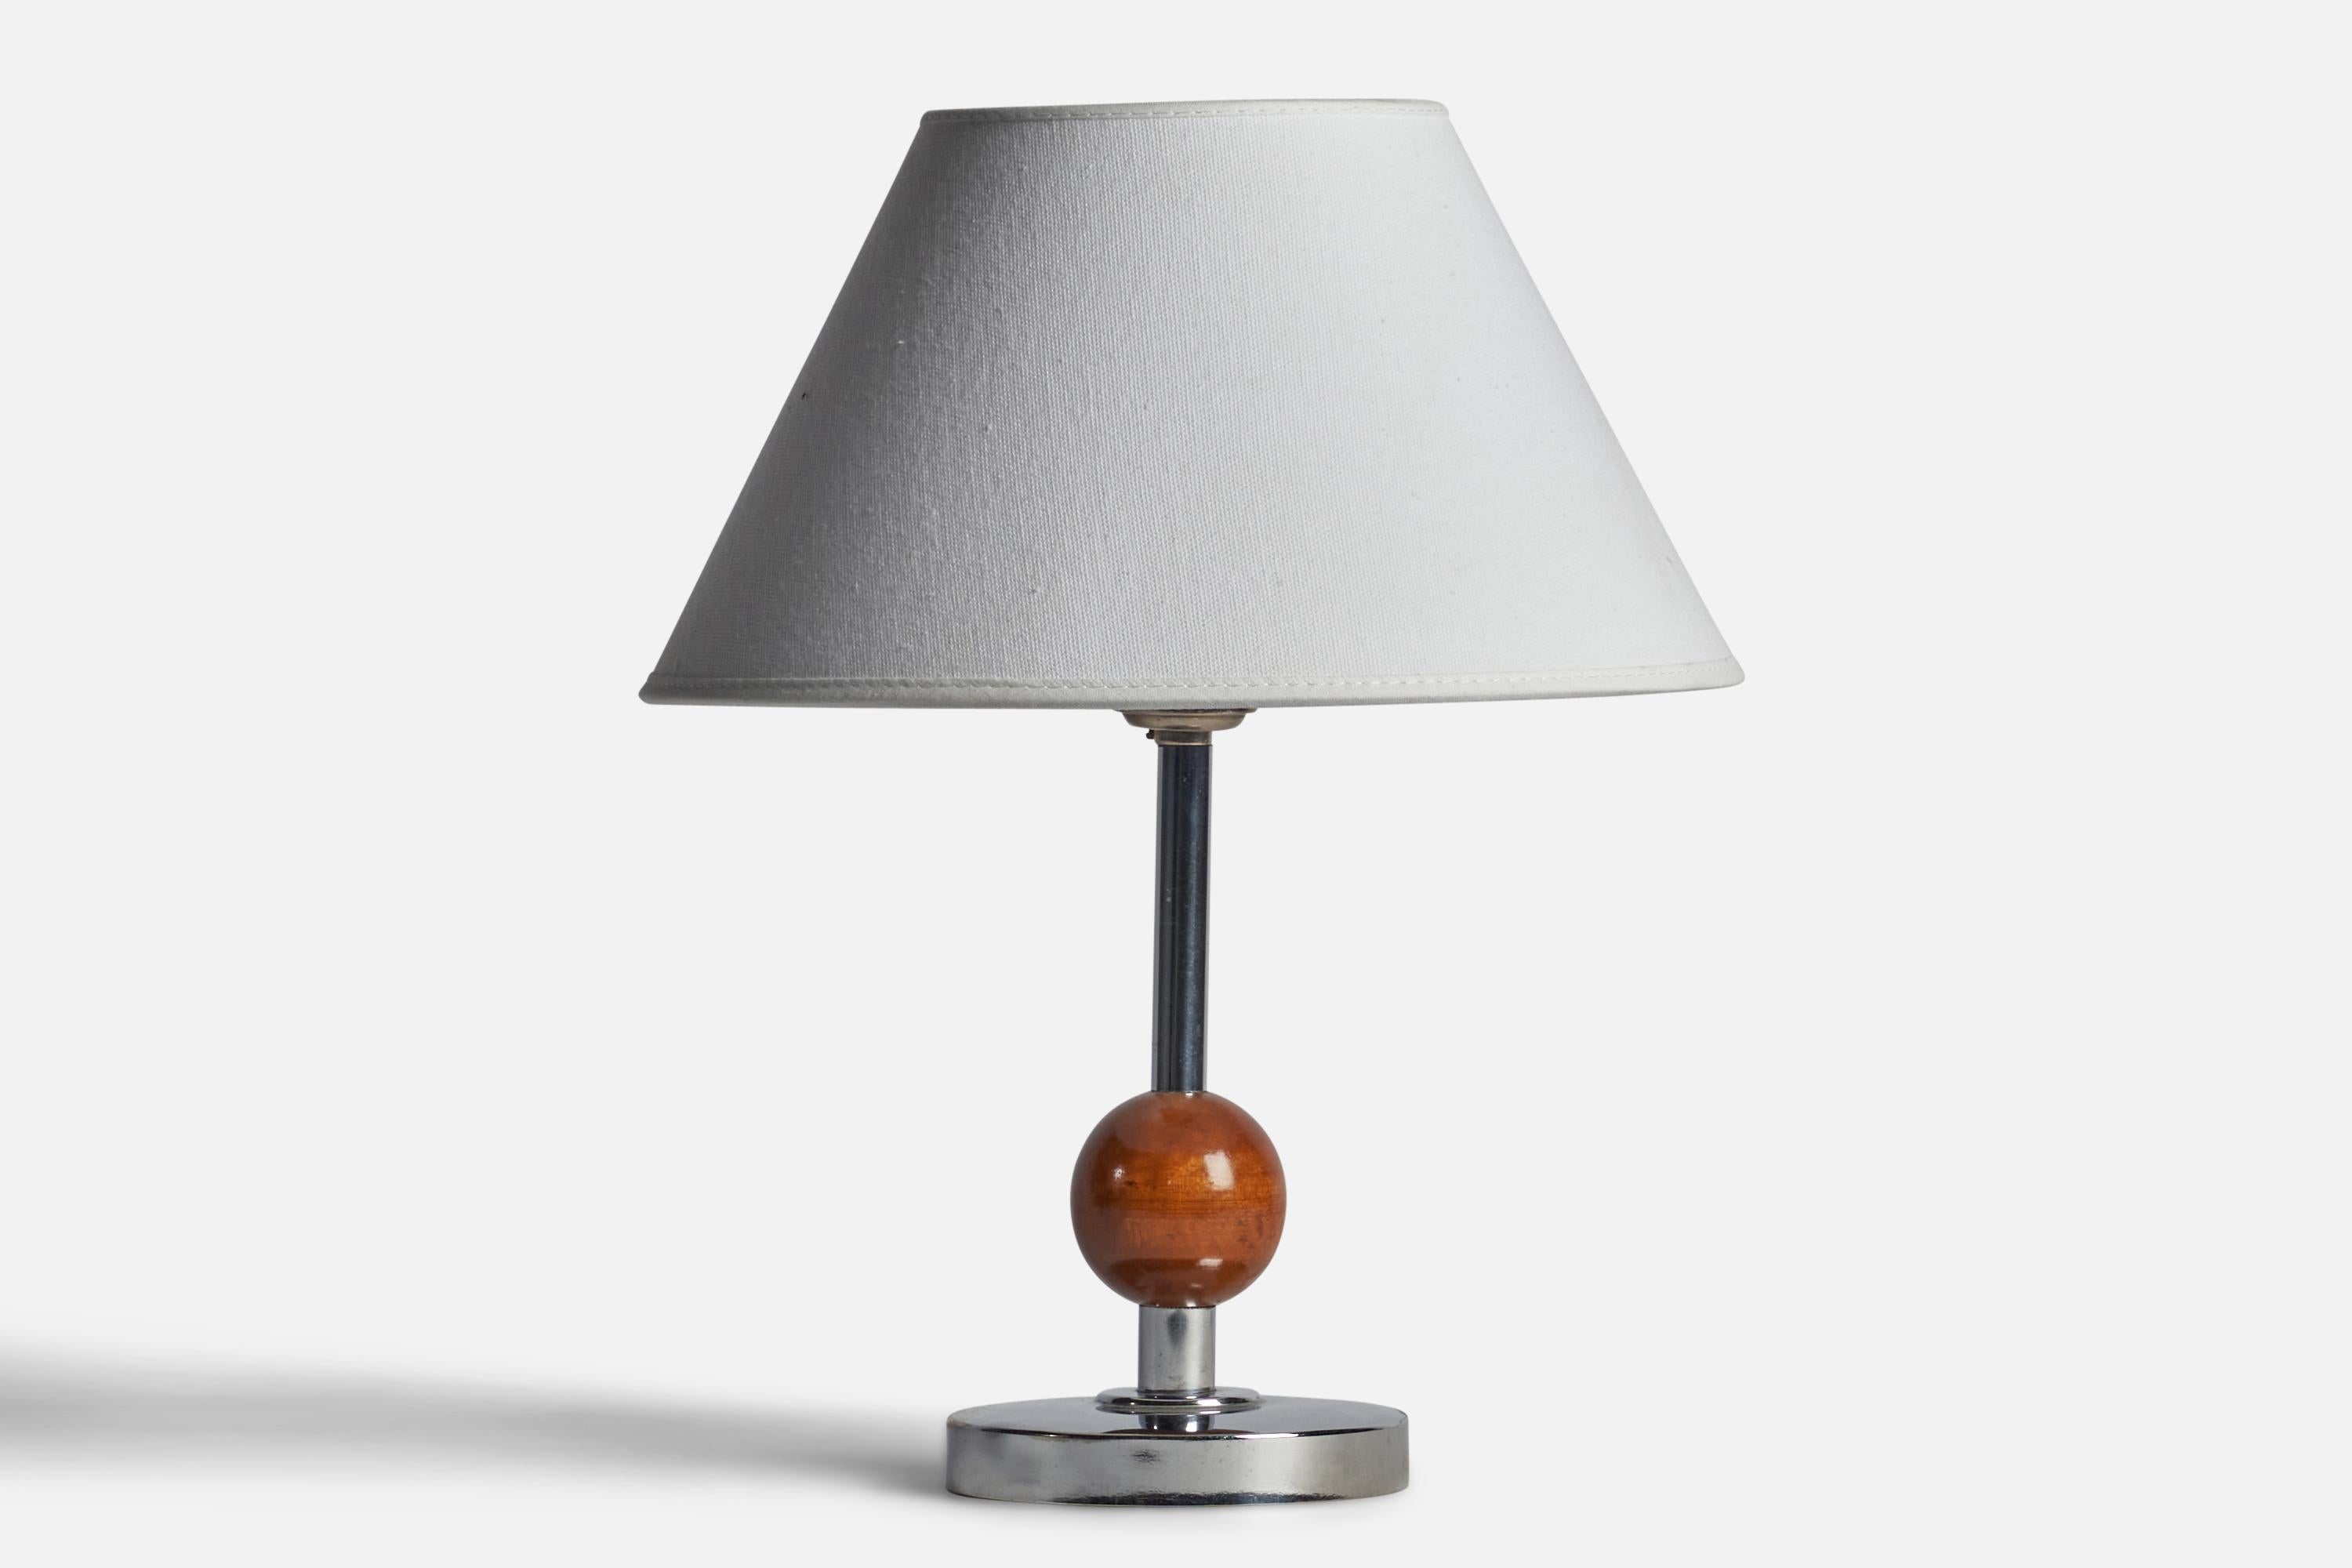 A chrome metal and stained birch table lamp designed and produced in Sweden, 1930s.

Dimensions of Lamp (inches): 8.8” H x 4.25” Diameter 
Dimensions of Shade (inches): 4.5” Top Diameter x 10” Bottom Diameter x 5.25” H 
Dimensions of Lamp with Shade